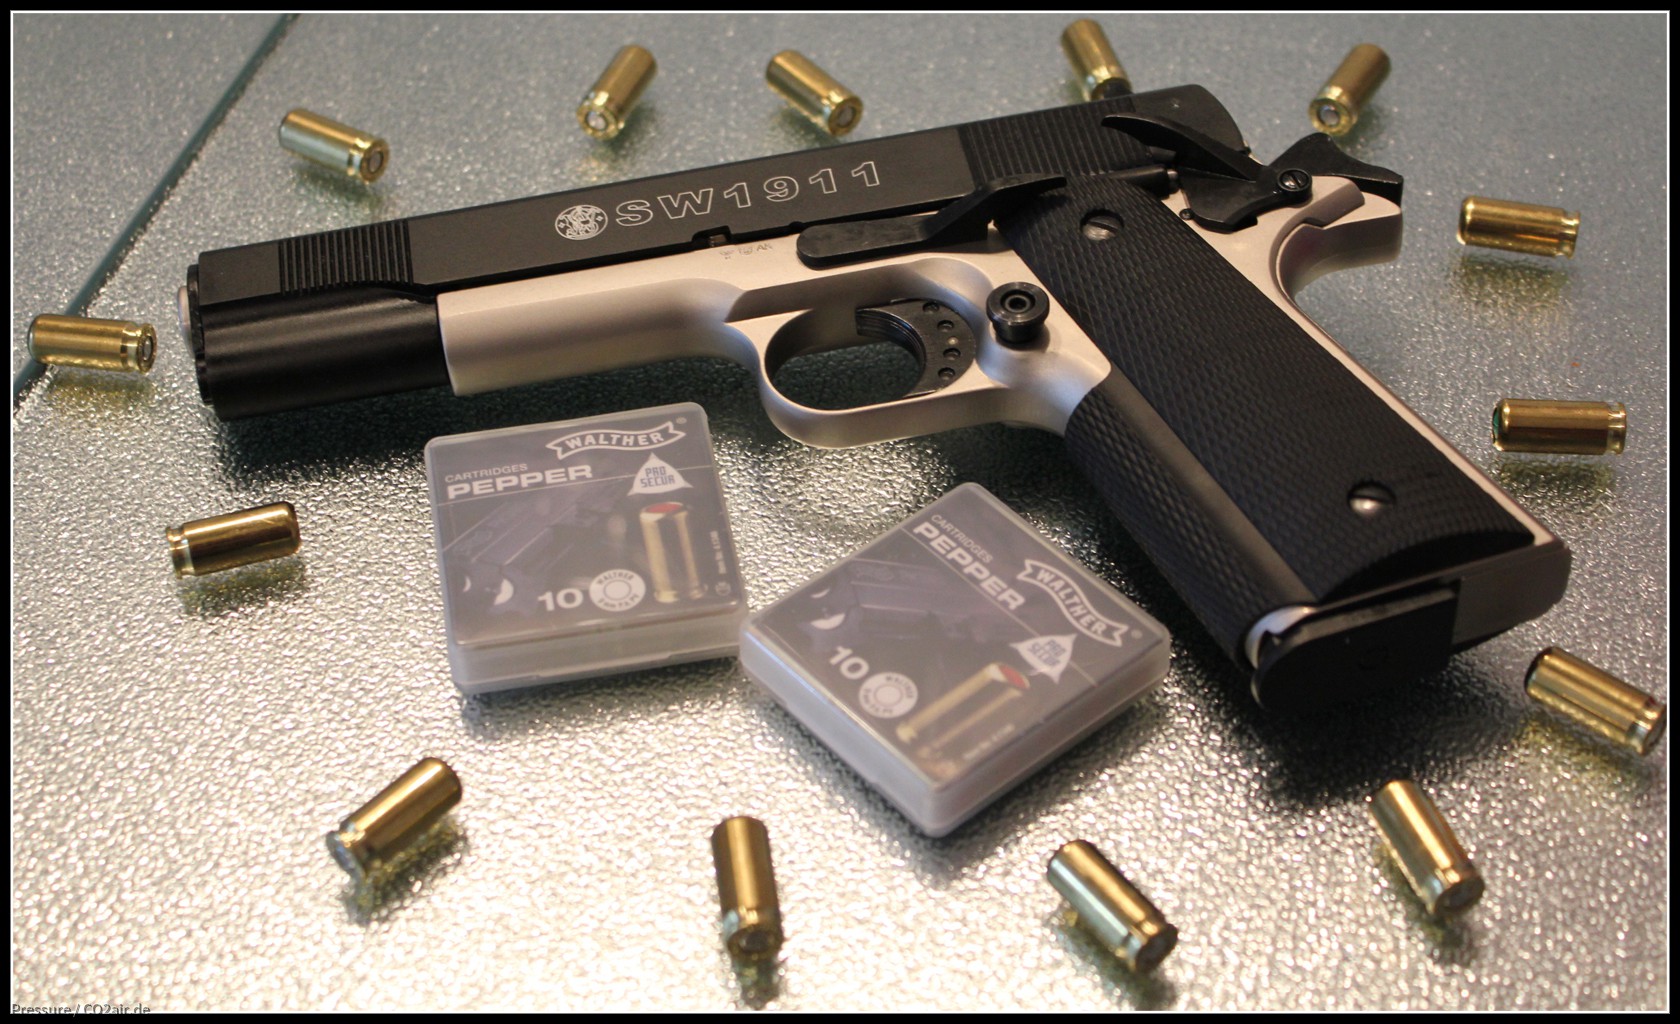 SMITH & WESSON 1911